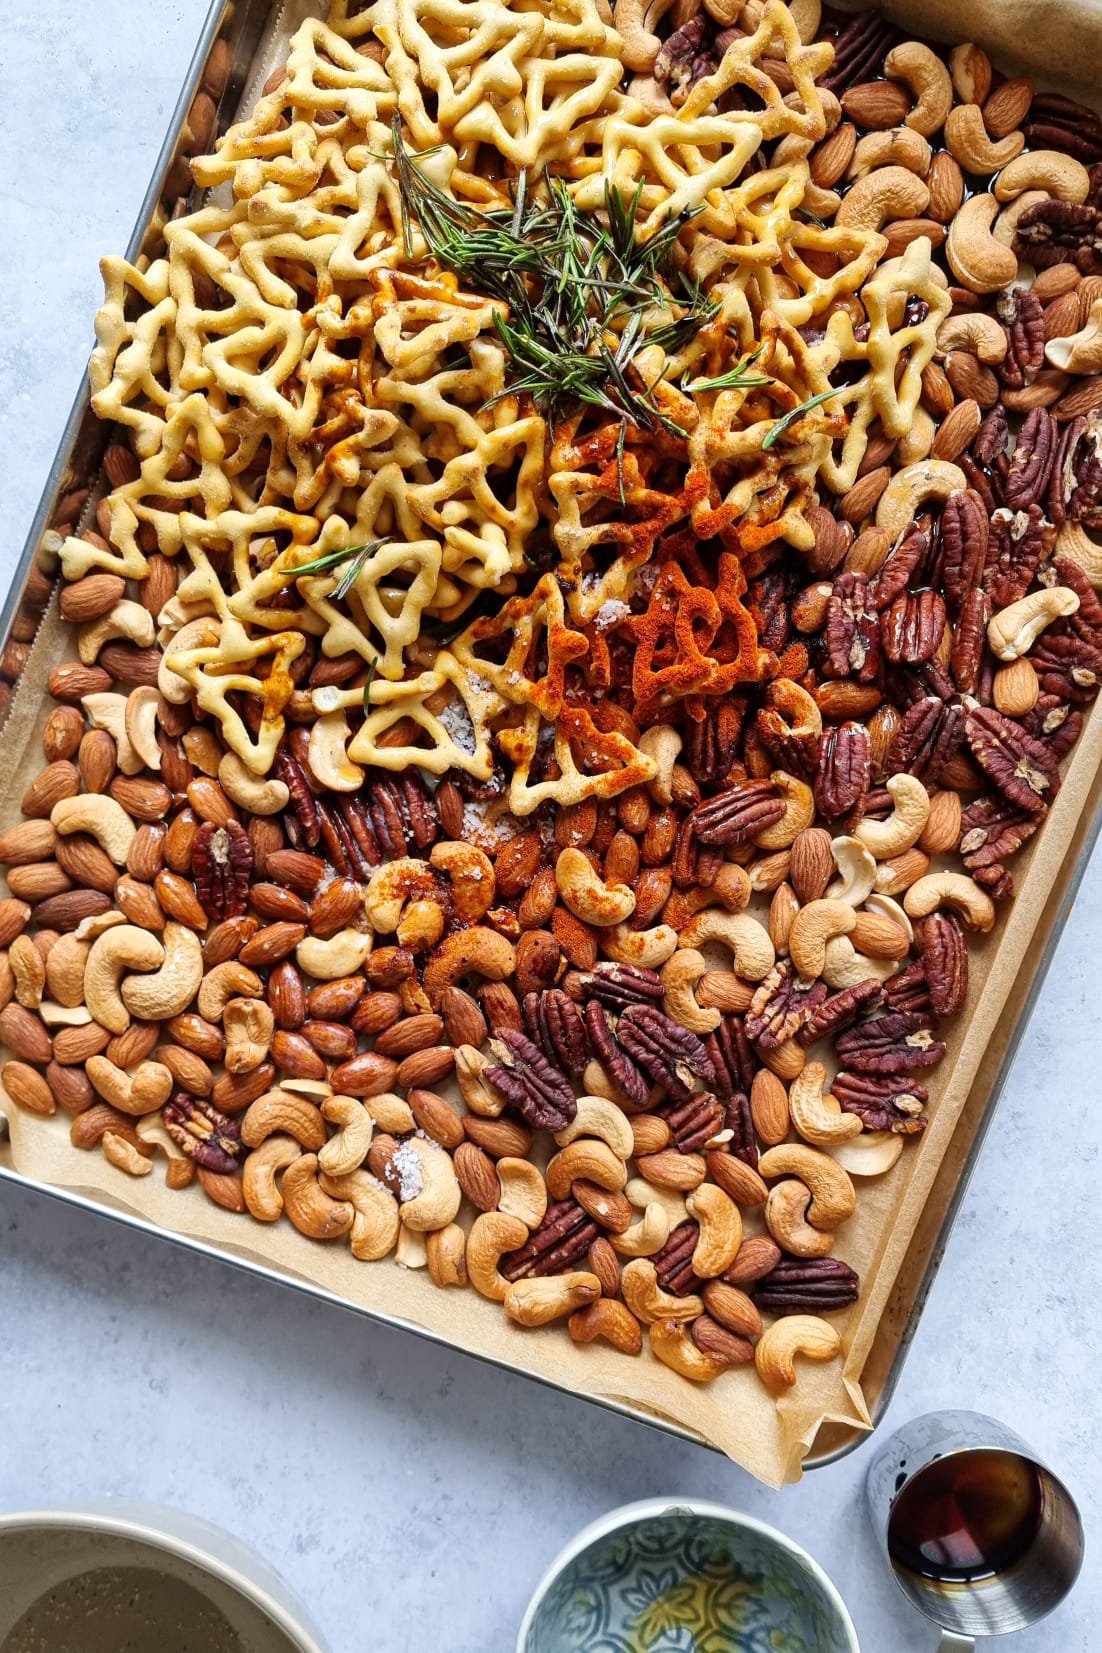 Adding the spices, sauces, and rosemary to the roasted nuts